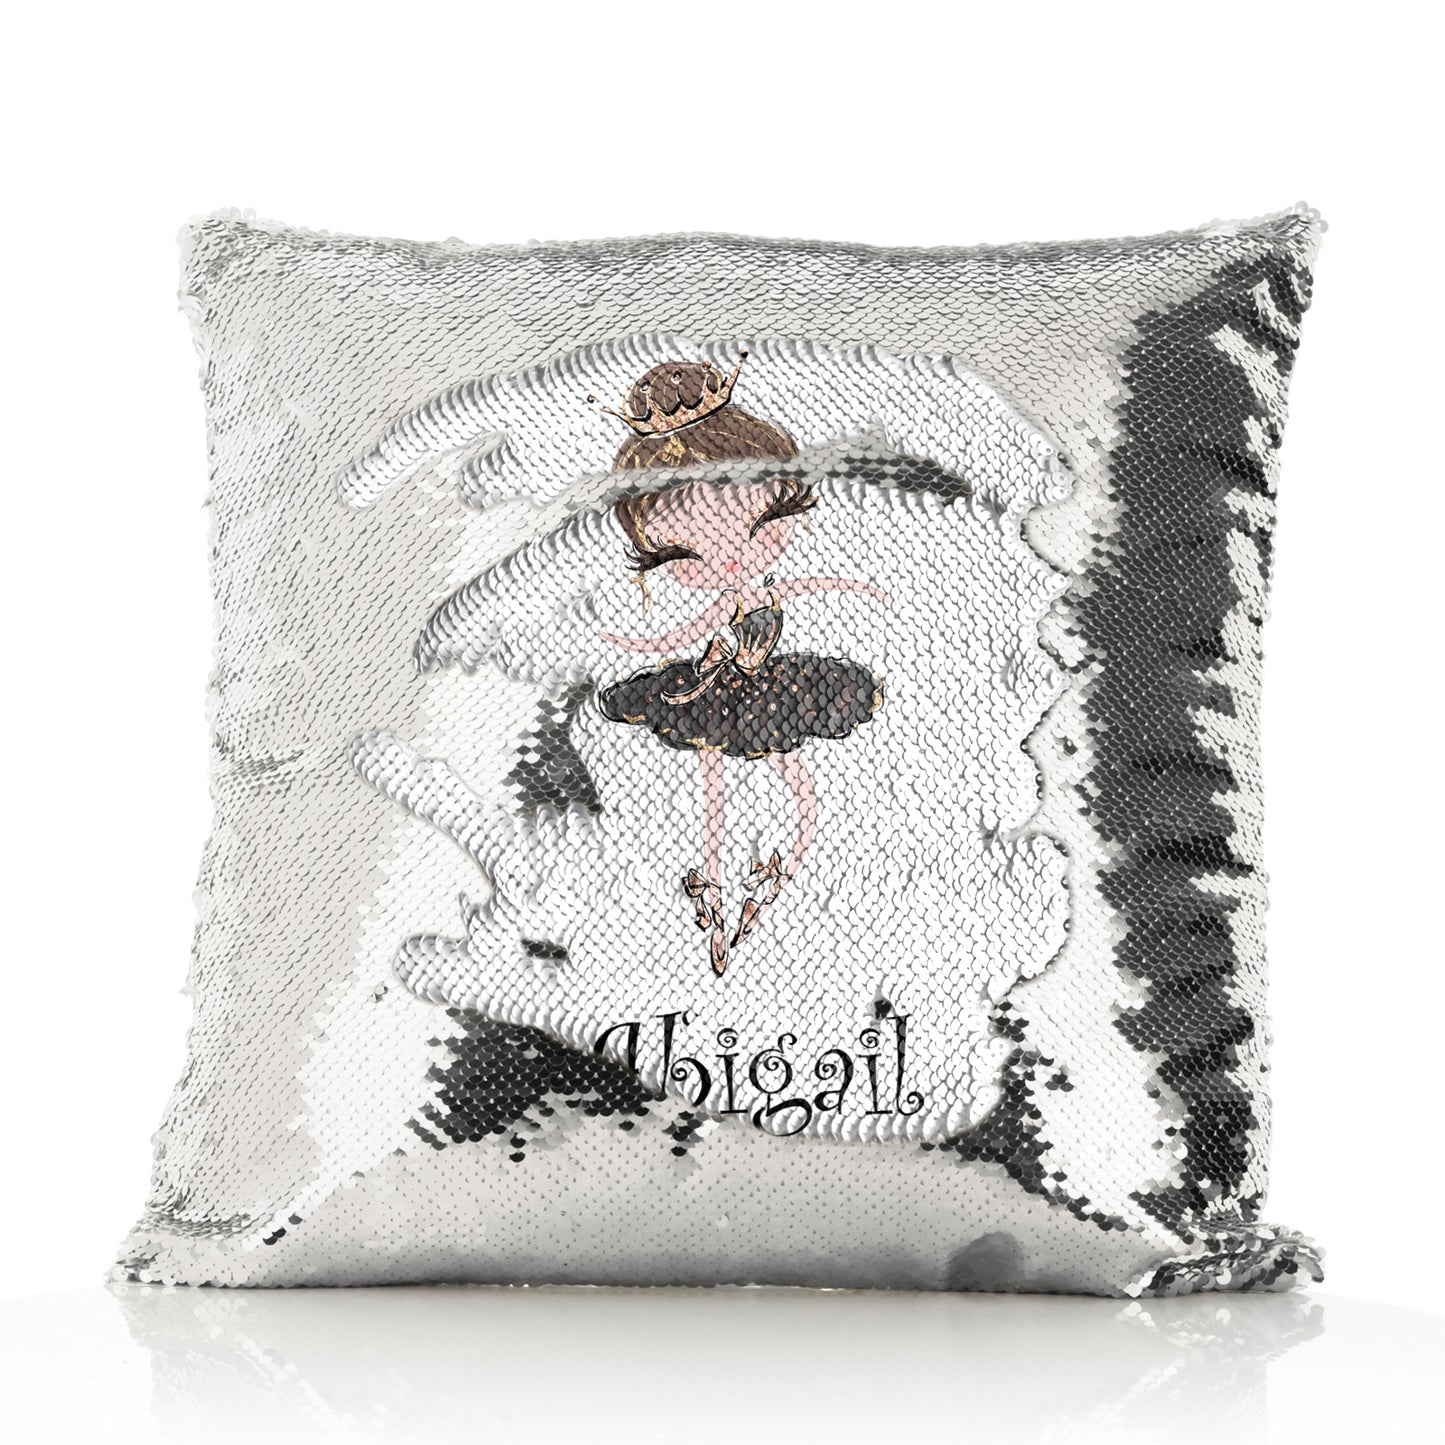 Personalised Sequin Cushion with Cute Text and Light Brown Hair Black Dress Tiara Ballerina